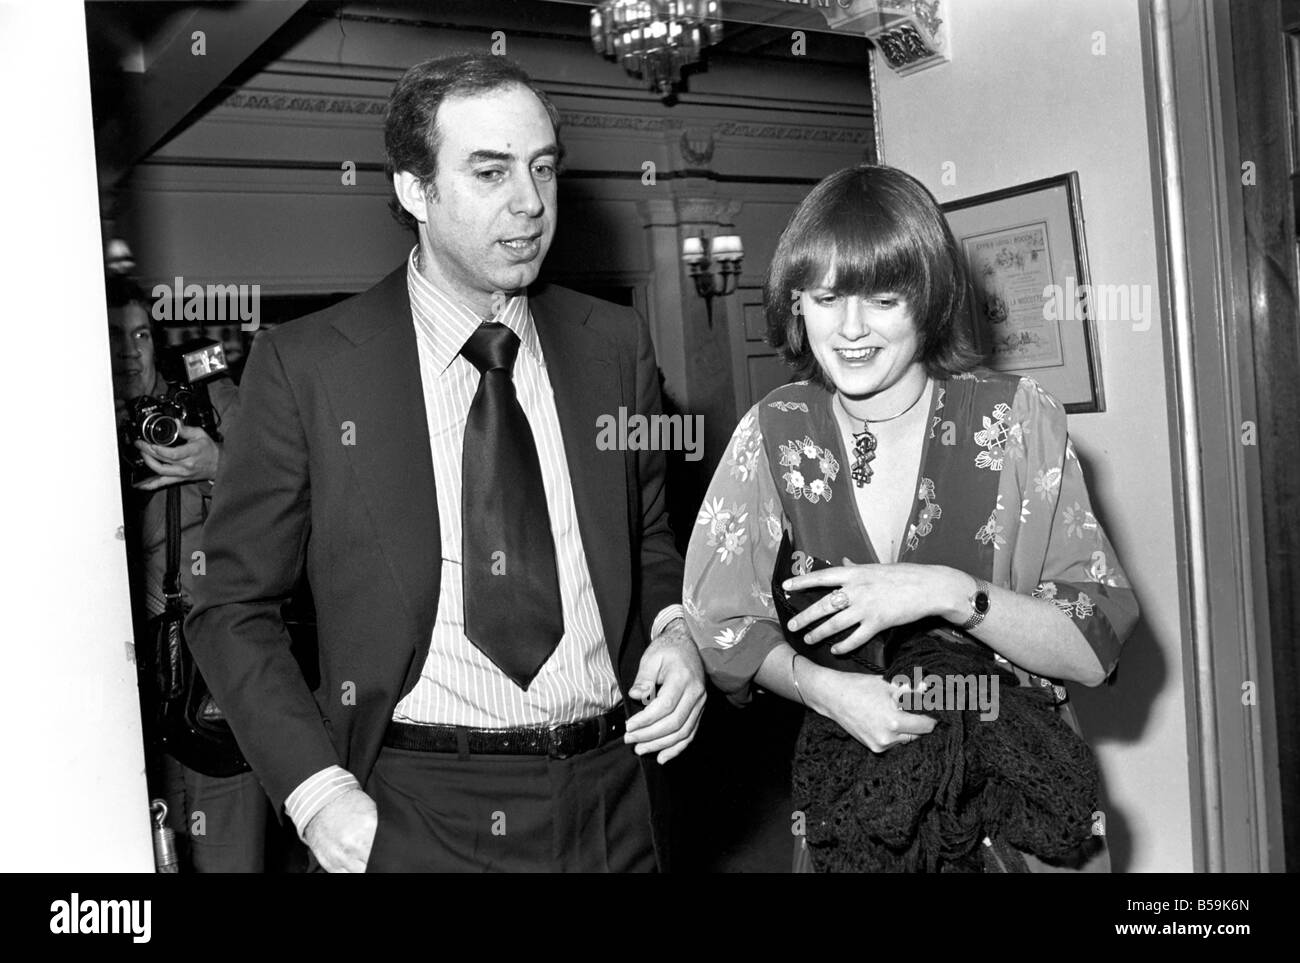 Screen stars arrive at the Comedy Theatre Haymarket, for the first night showing of the play The Exorcism. ;Lady Jane Wellerssley arrives at the theatre with a man friend;April 1975 ;75-1743-001 Stock Photo